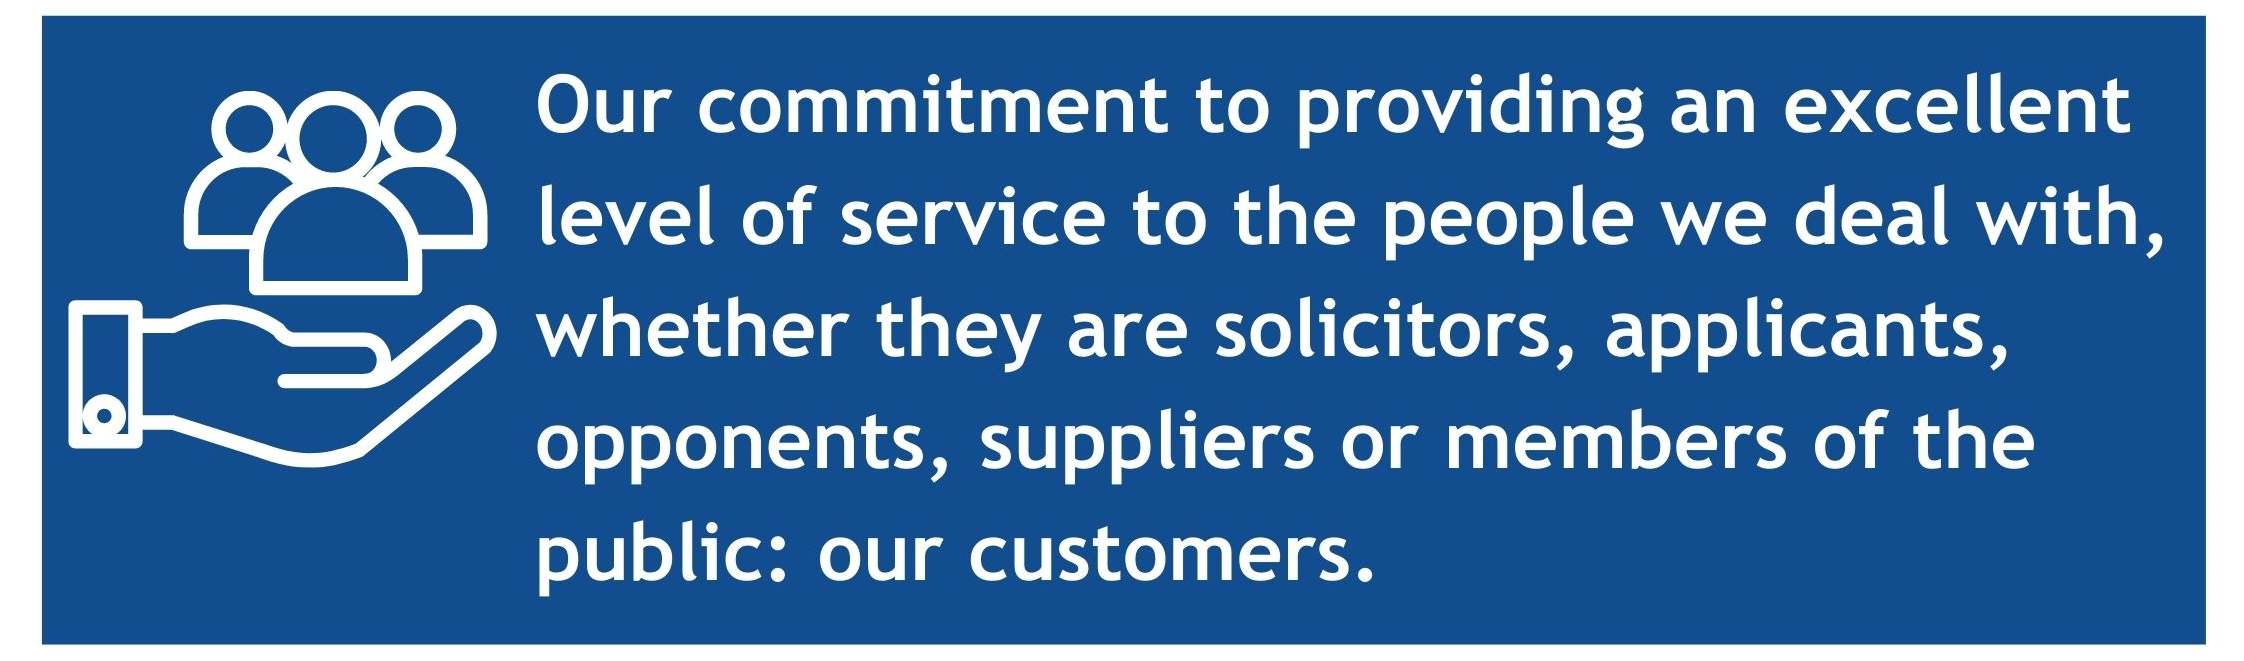 Our commitment to providing an excellent level of service to the people we deal with, whether they are solicitors, applicants, opponents, suppliers or members of the public: our customers